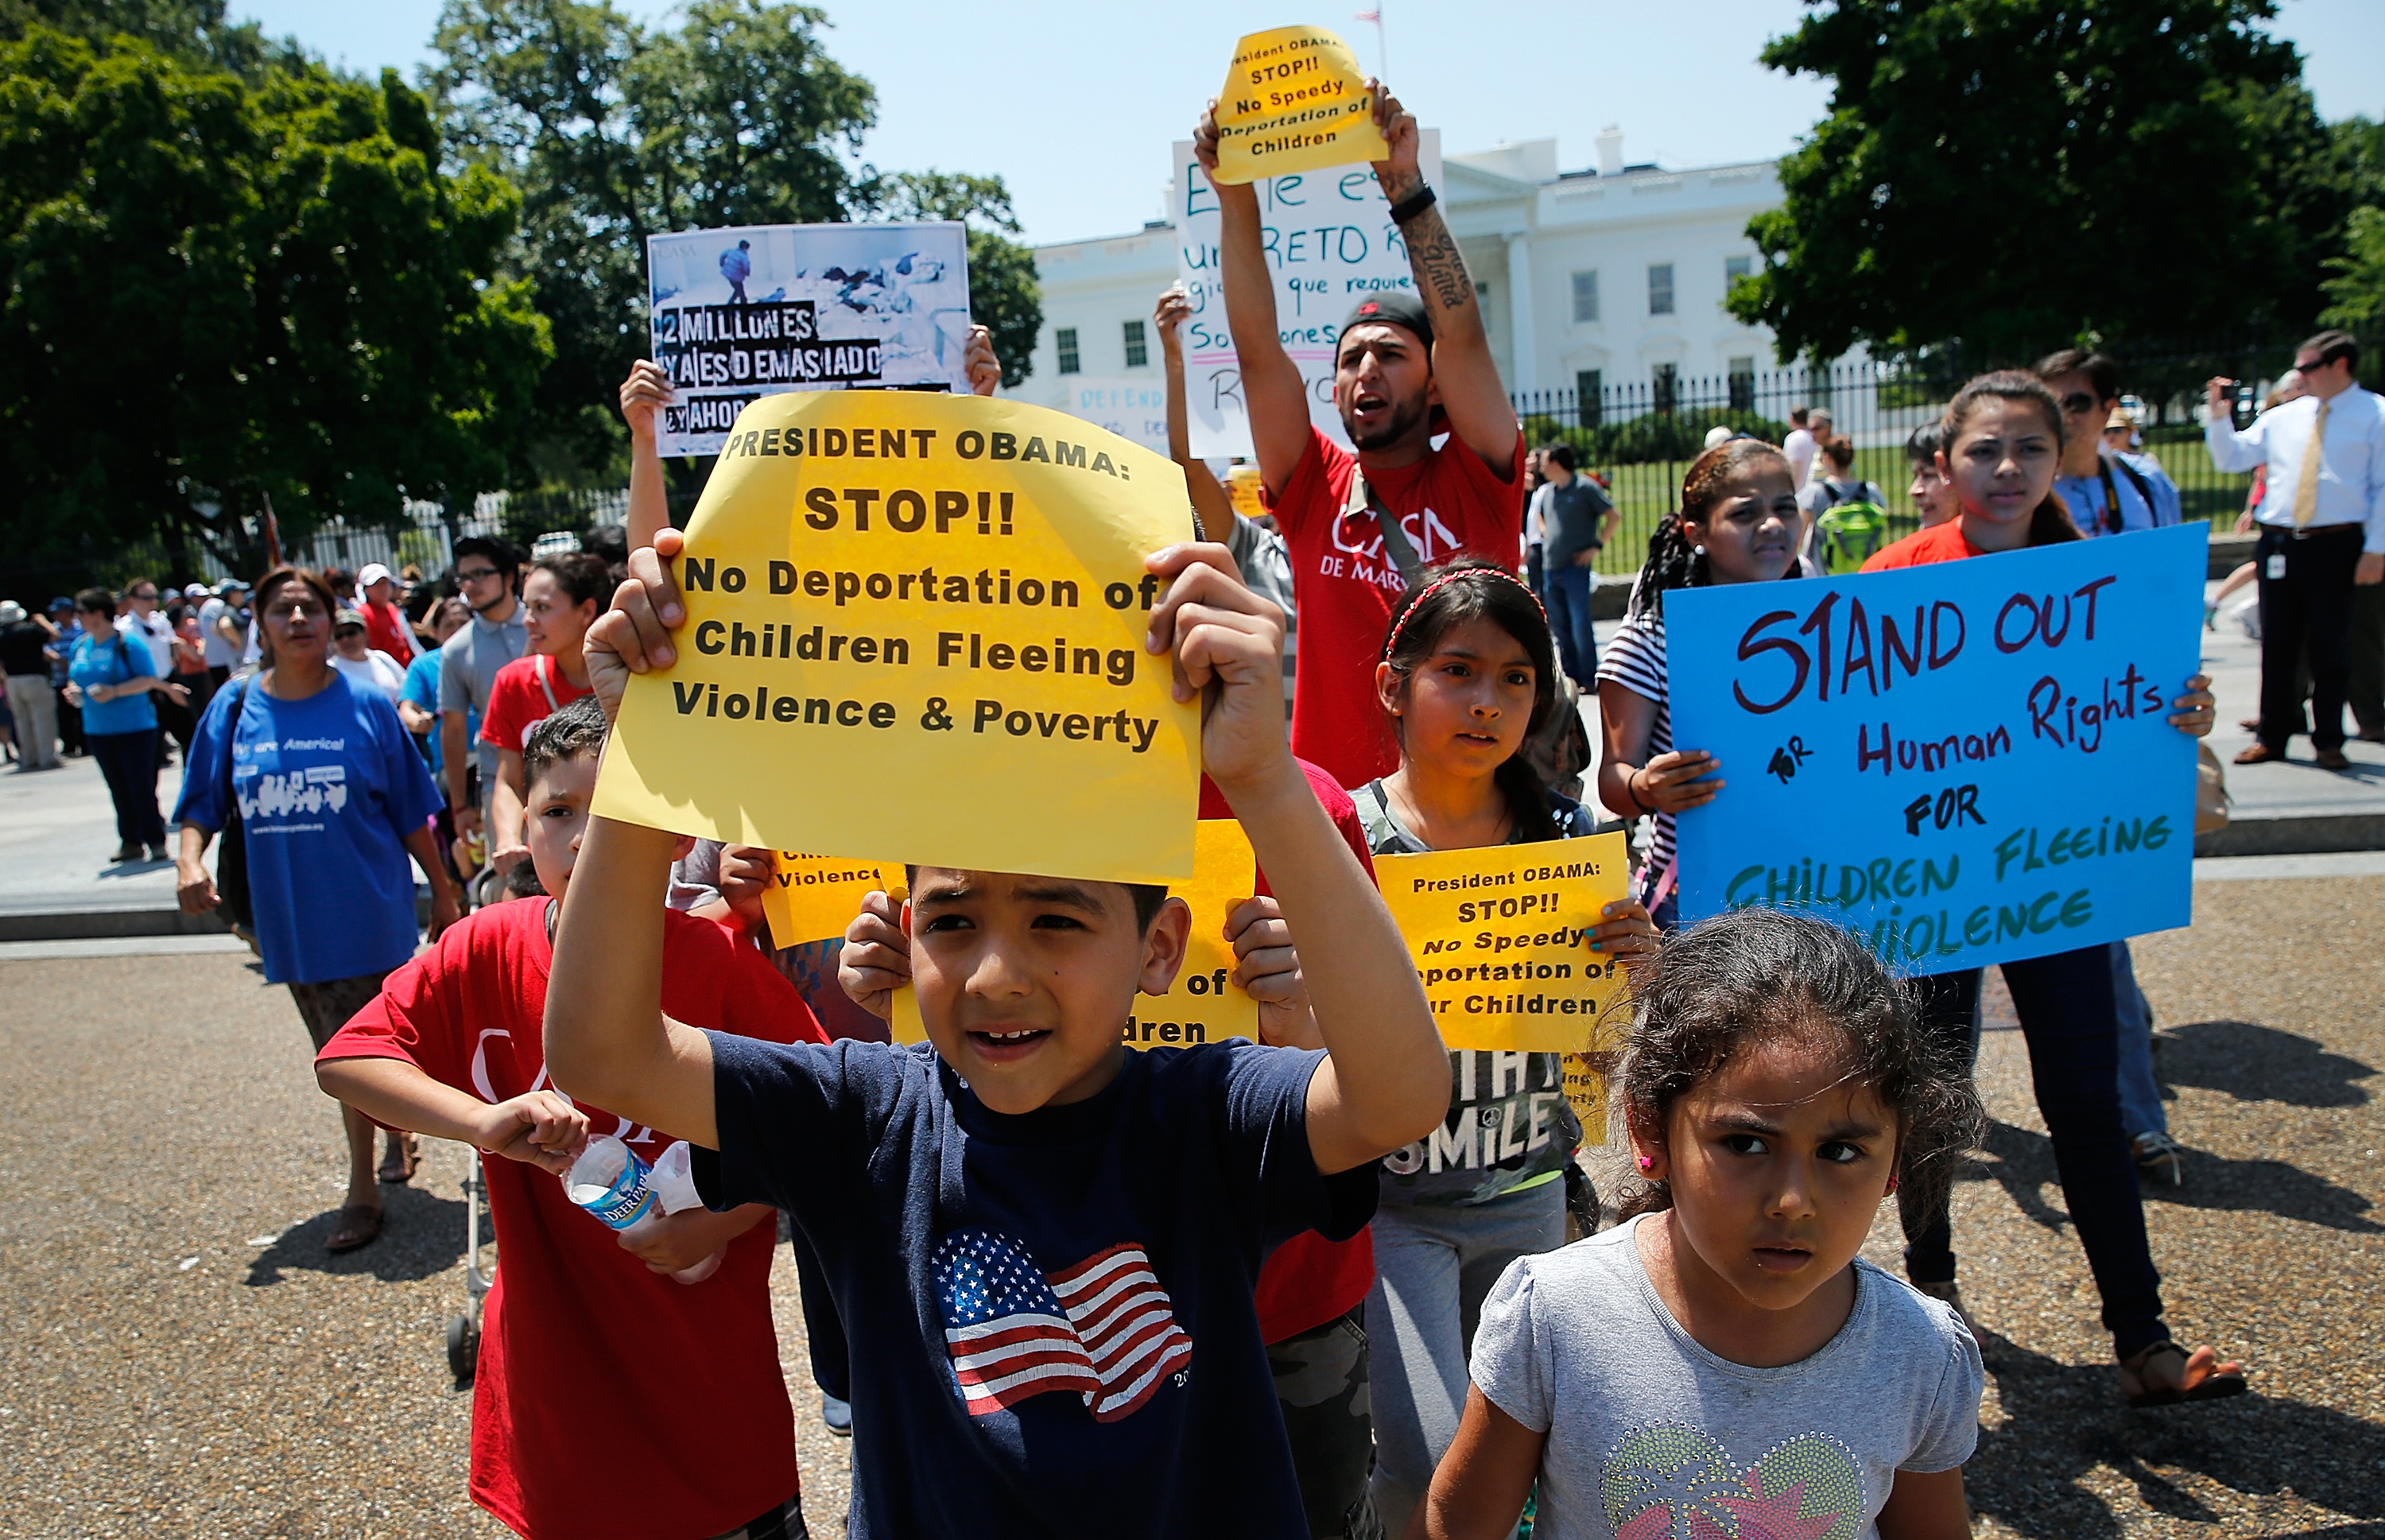 Young children join immigration reform protesters while marching in front of the White House July 7, 2014 in Washington, DC. (Win McNamee—Getty Images)